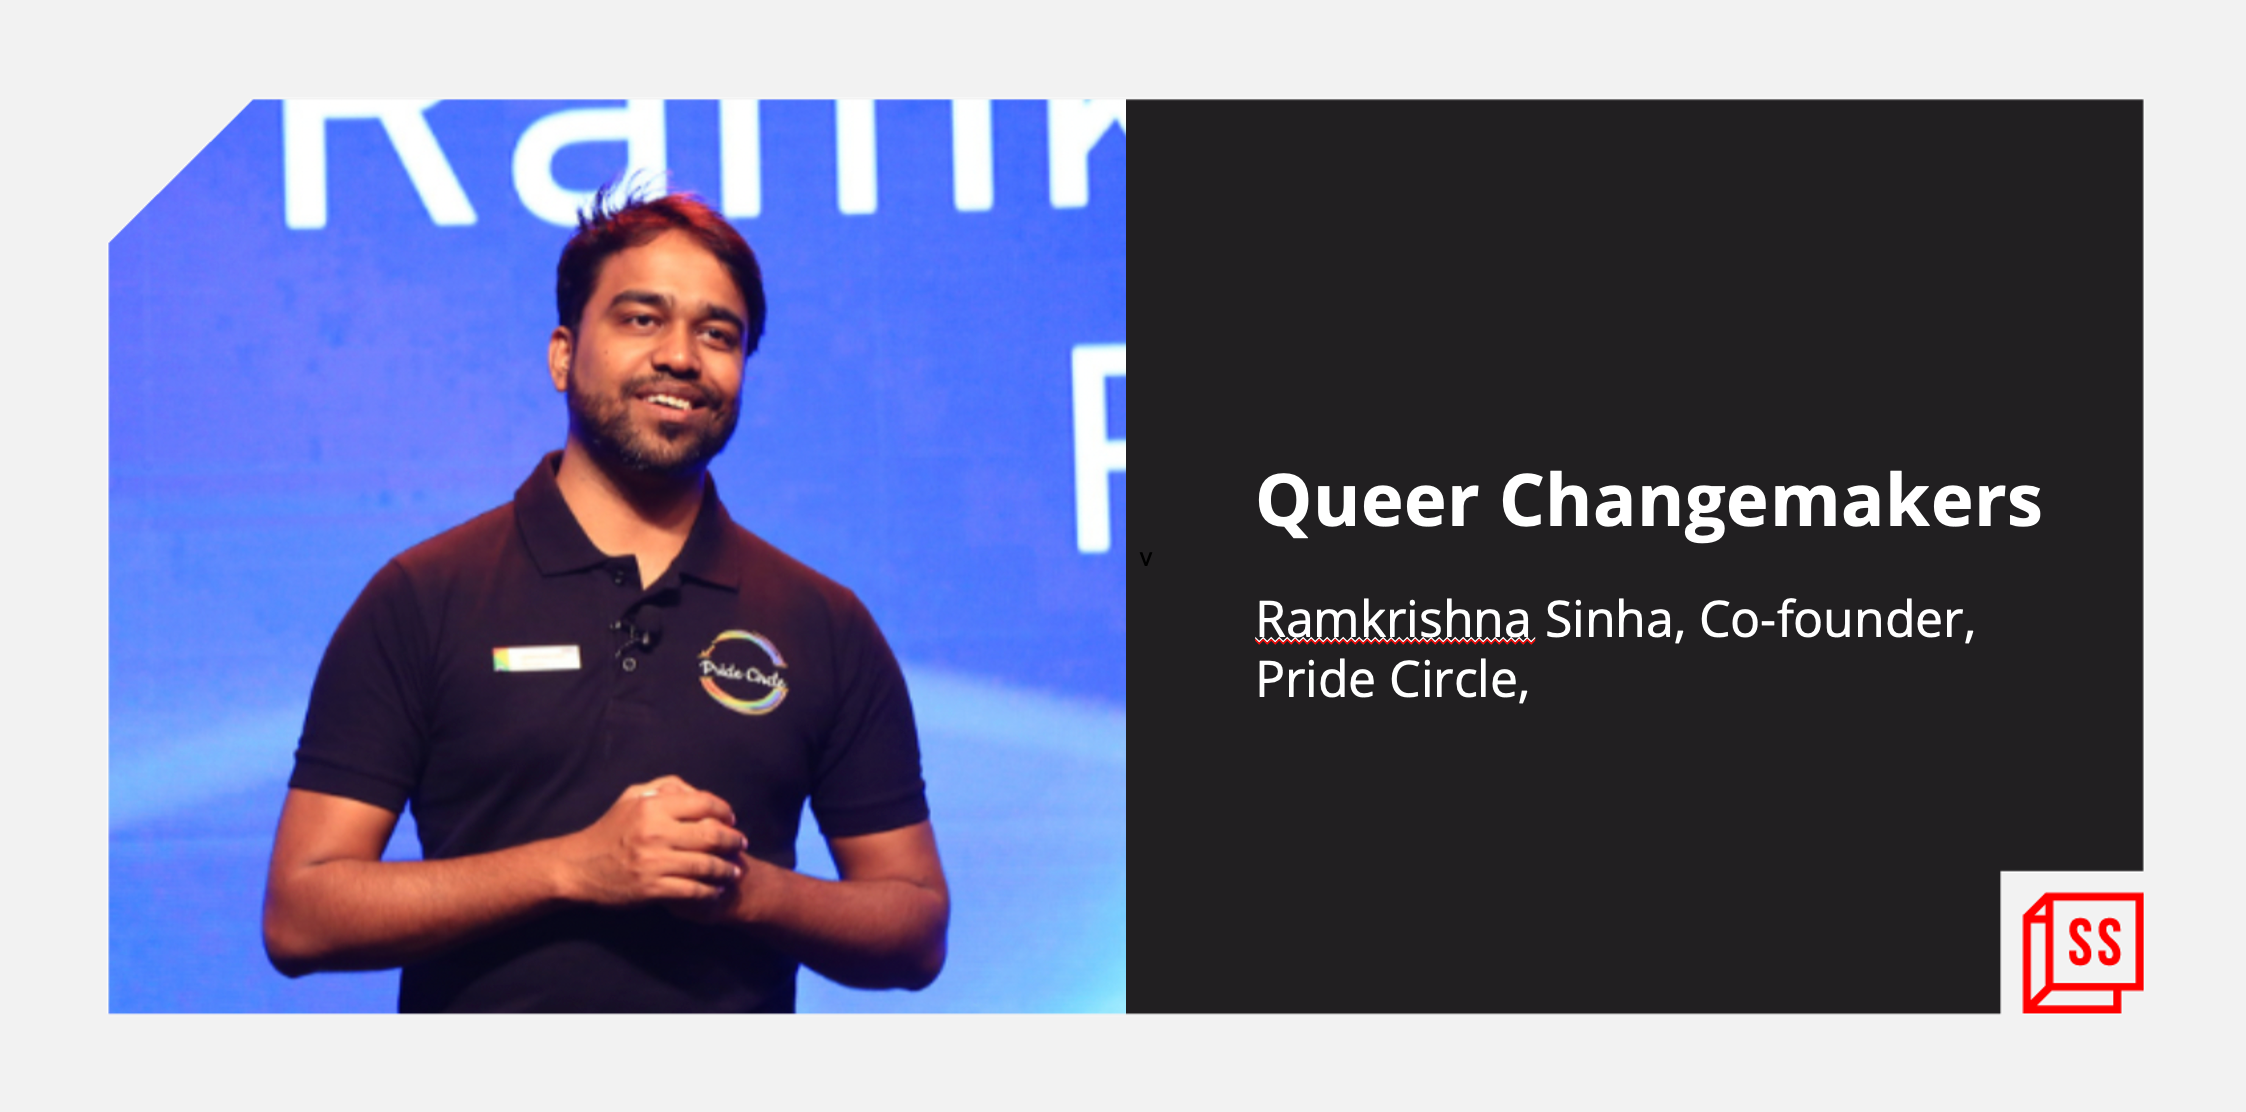 [Queer Changemakers] How Pride Circle is bringing a culture transformation at the workplace